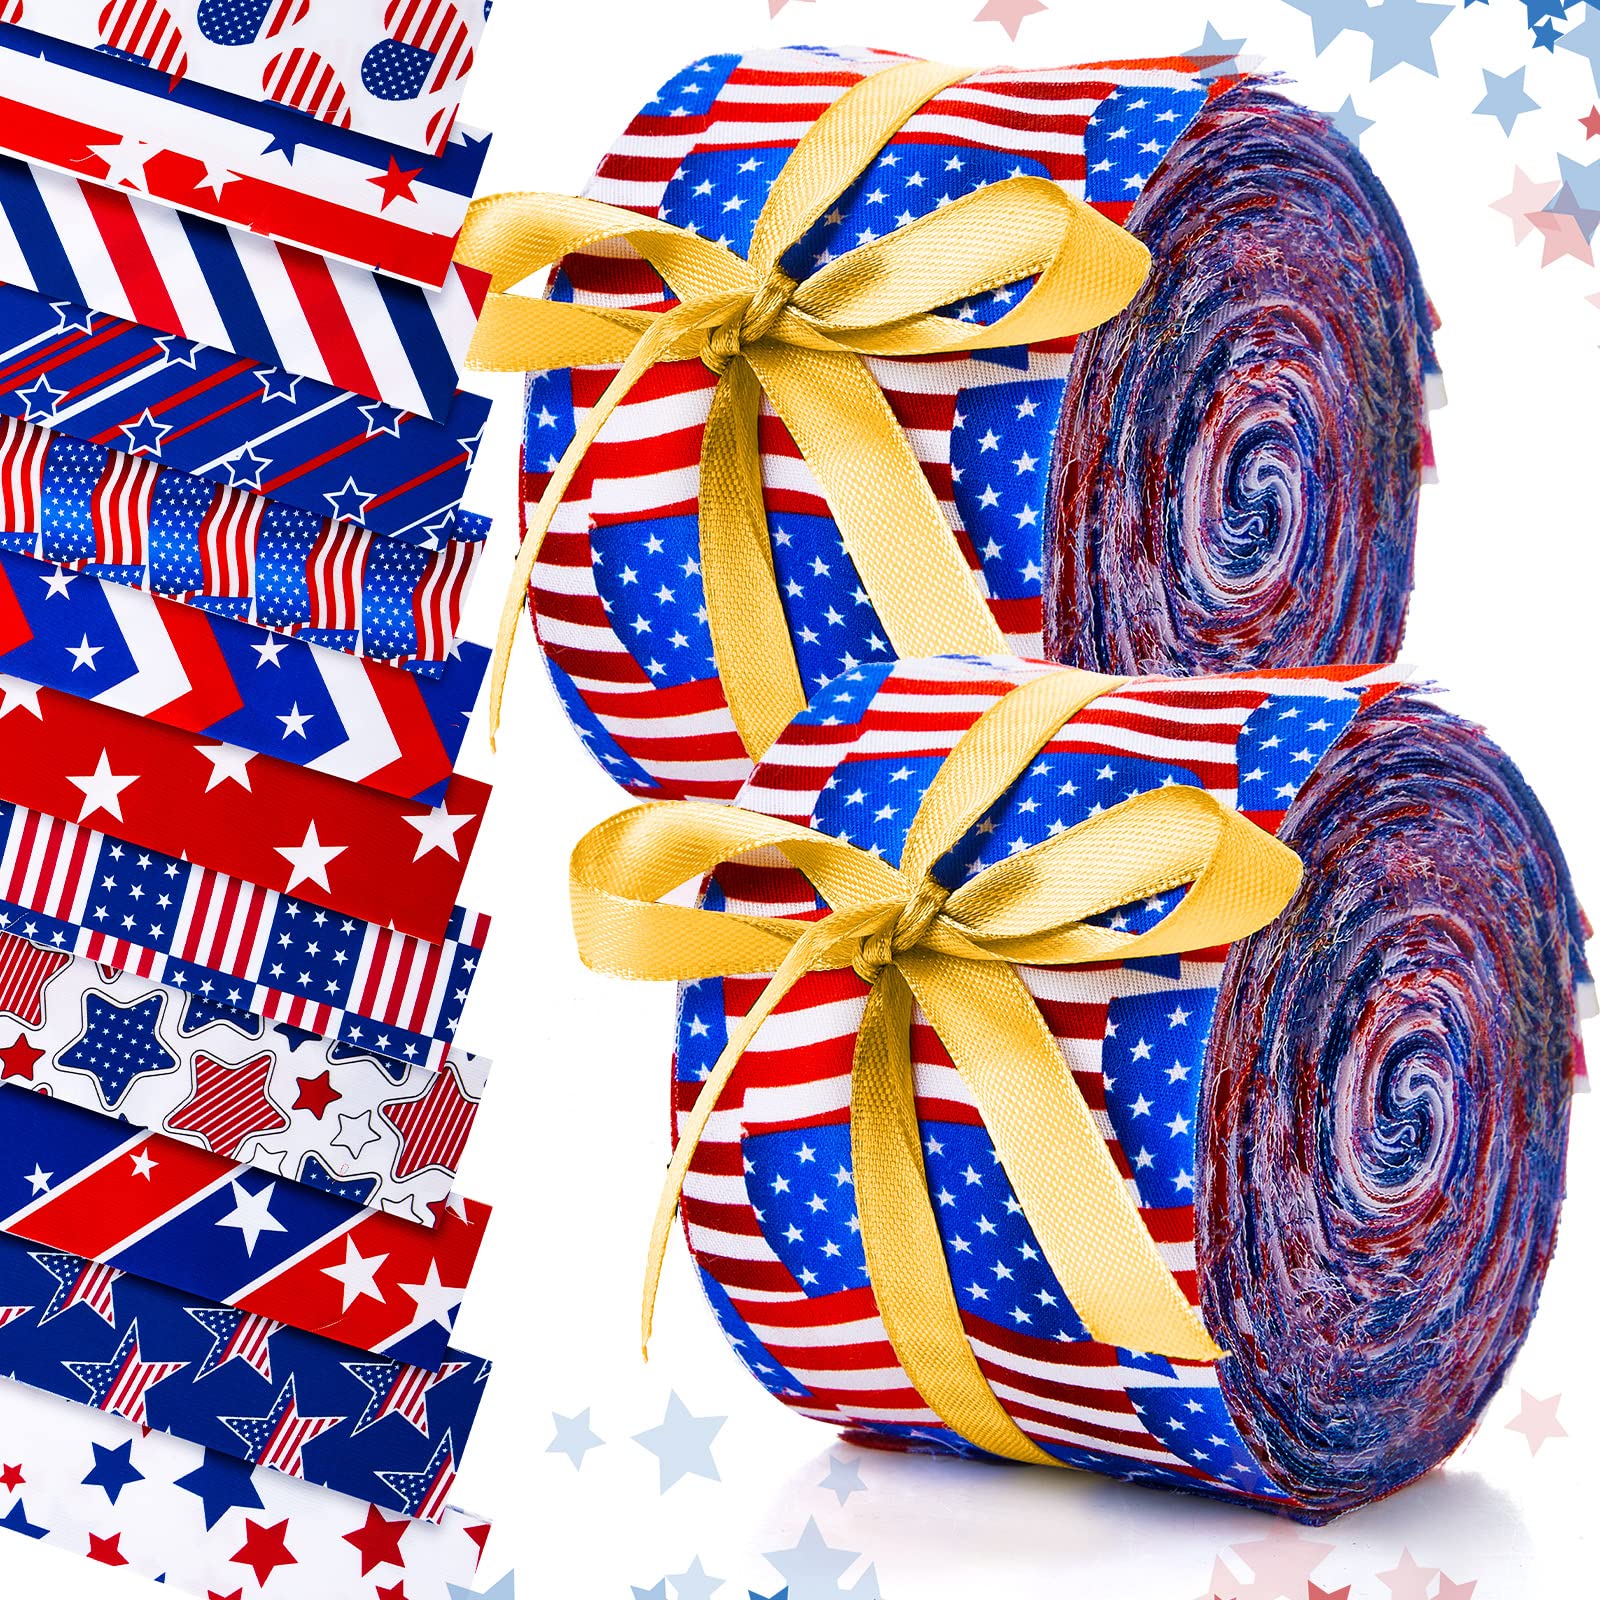 60 Pcs Cotton Jelly 4th of July Fabric Roll Independence Day Fabric Strips Cotton Jelly Fabric Patriotic Quilting Fabric Roll for Sewing DIY Patchwork, 12 Styles